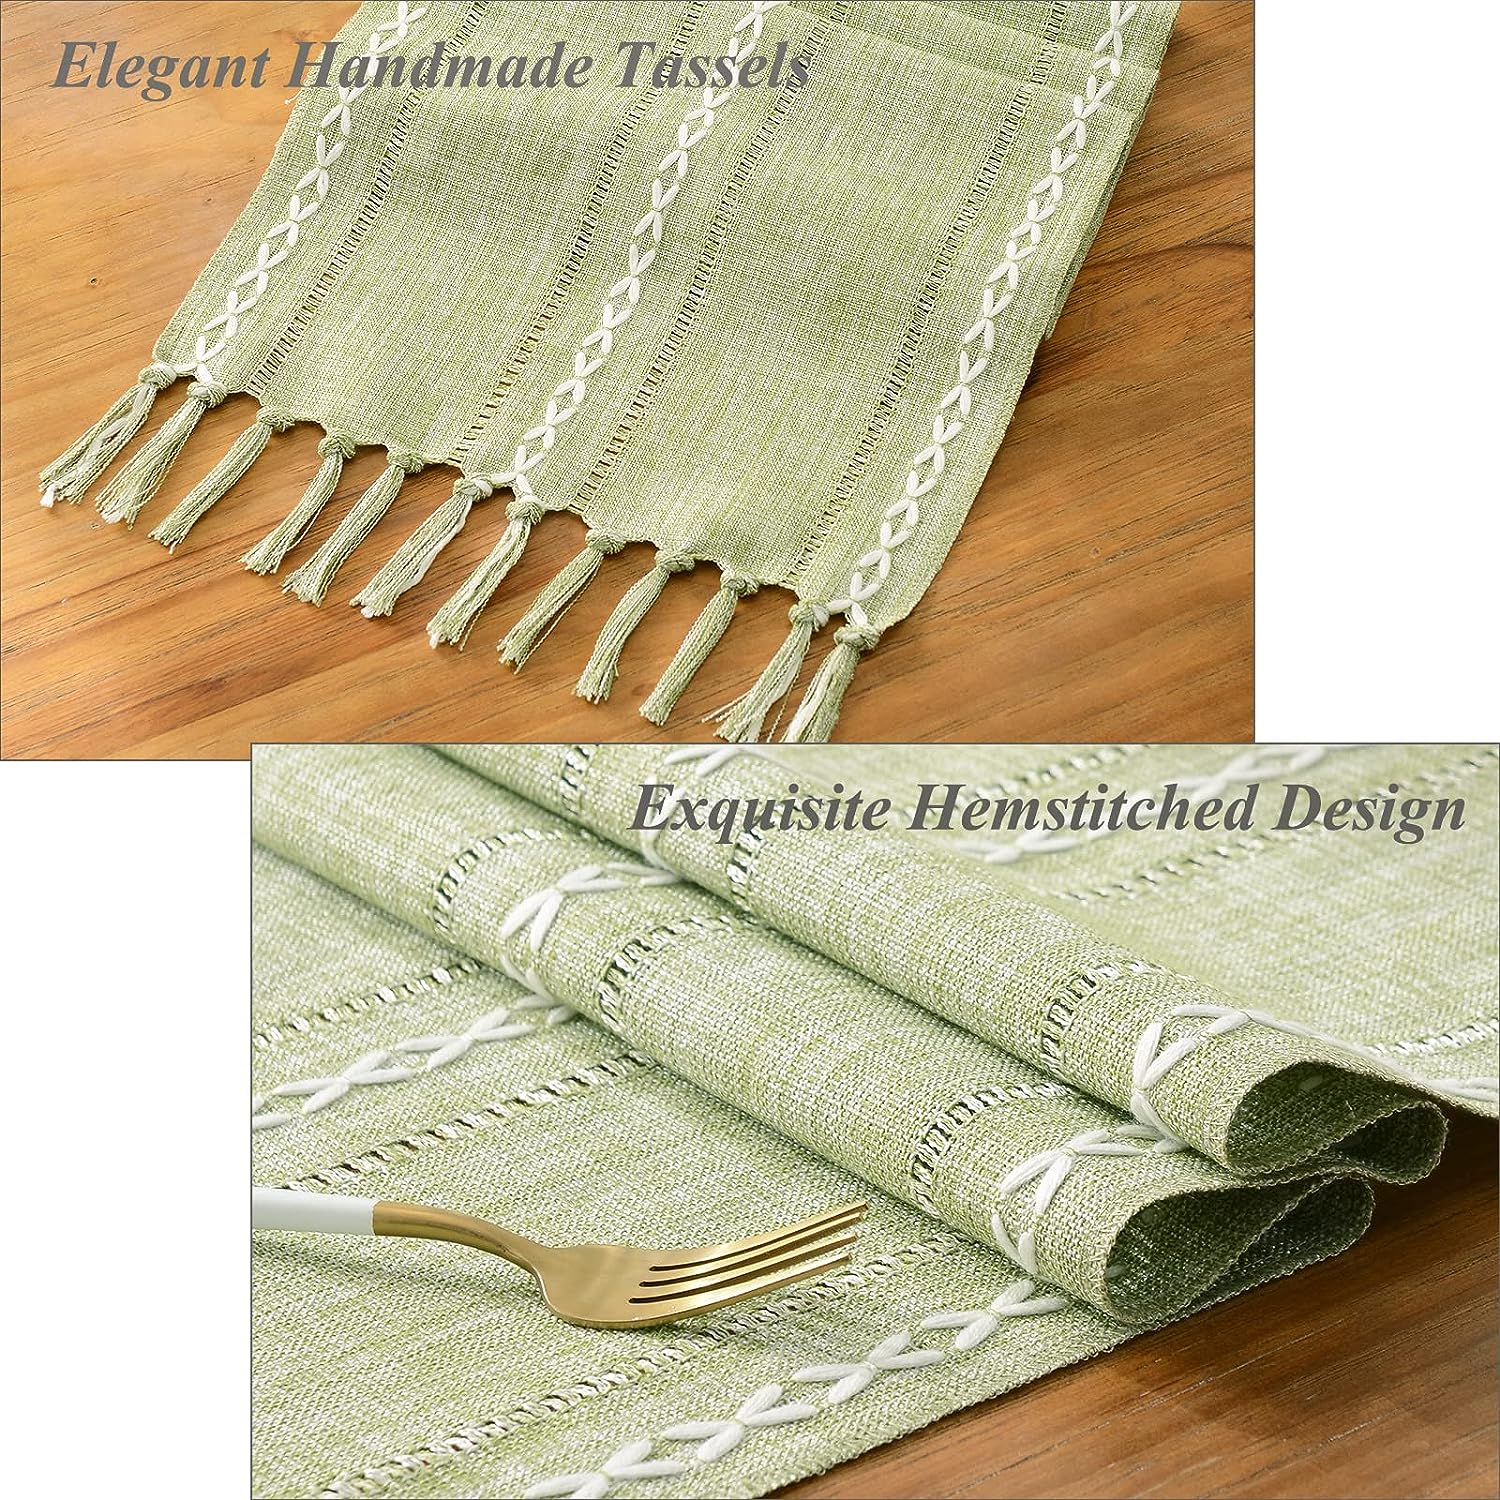 Wracra Hemstitch Cotton Linen Table Runner Farmhouse Style Sage Green Table Runner 180cm Long with Hand-tassels for Dining Kitchen Party and Dessert Table Decor(Sage Green, 180cm) 1